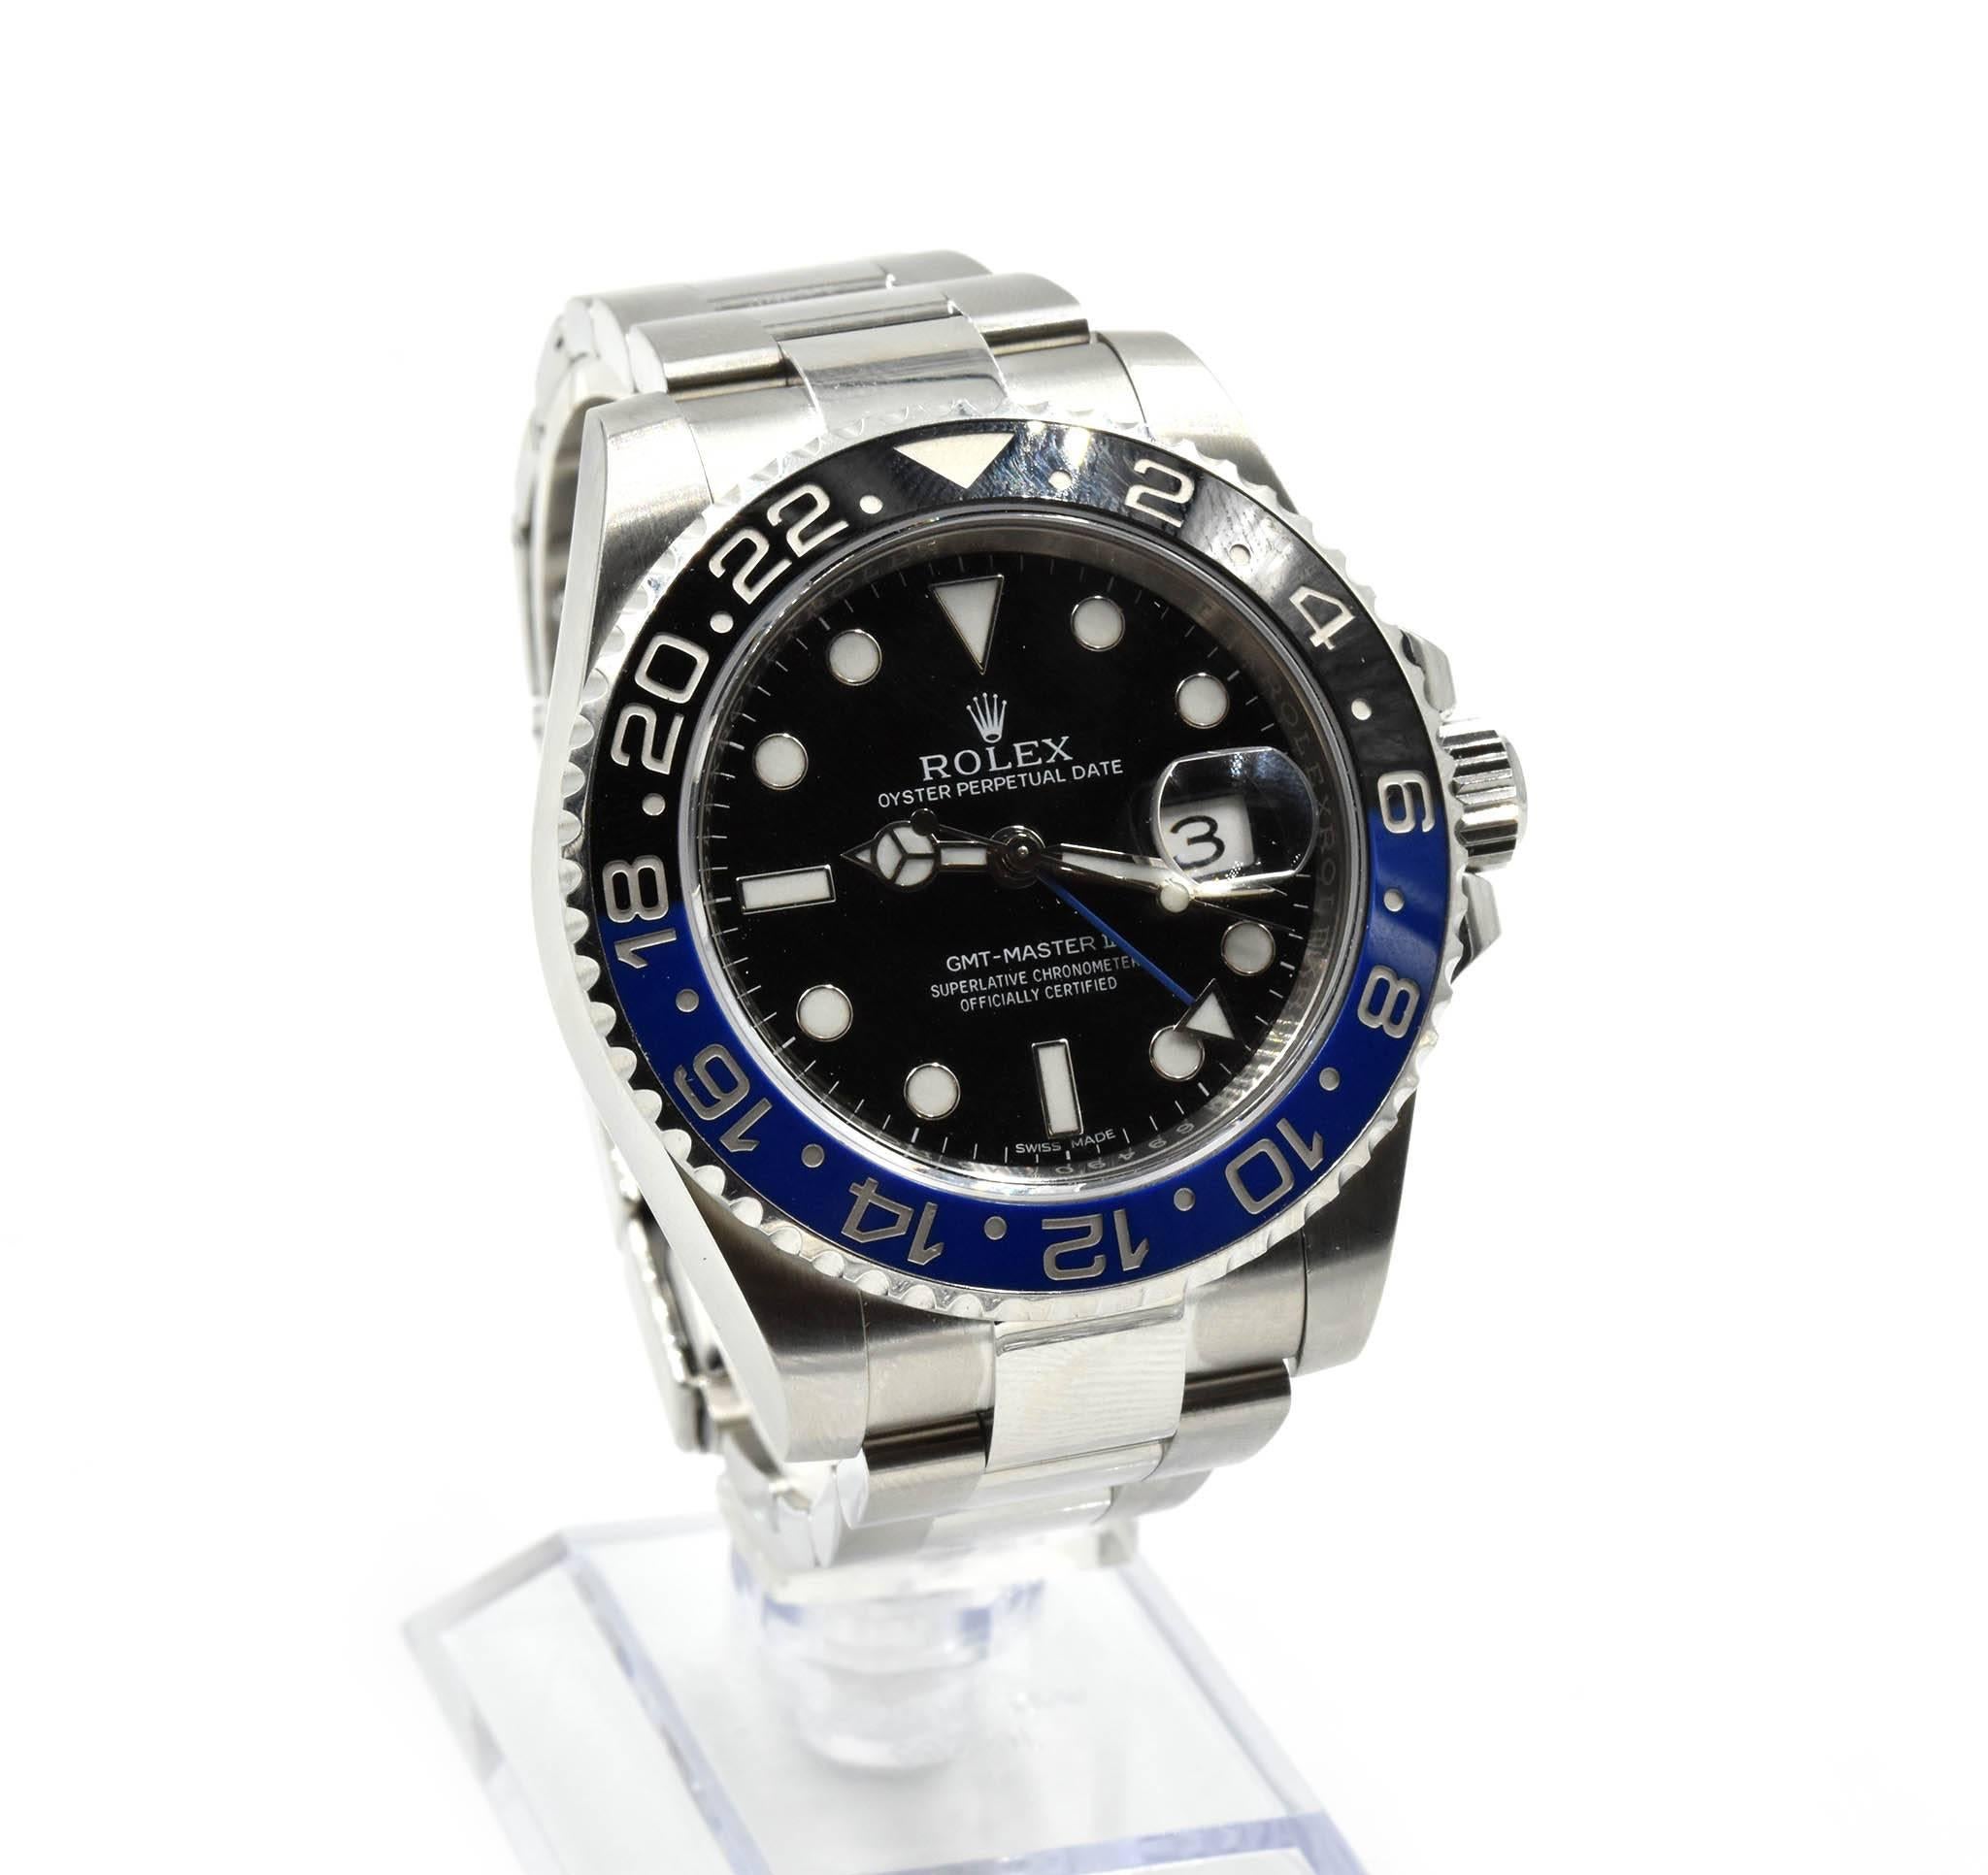 Movement: automatic Rolex caliber 3186 movement

Function: hours, minutes, seconds, date, GMT hand (second time zone)

Case: round 40mm stainless steel case with bi-directional black and blue dive bezel, scratch resistant sapphire crystal,